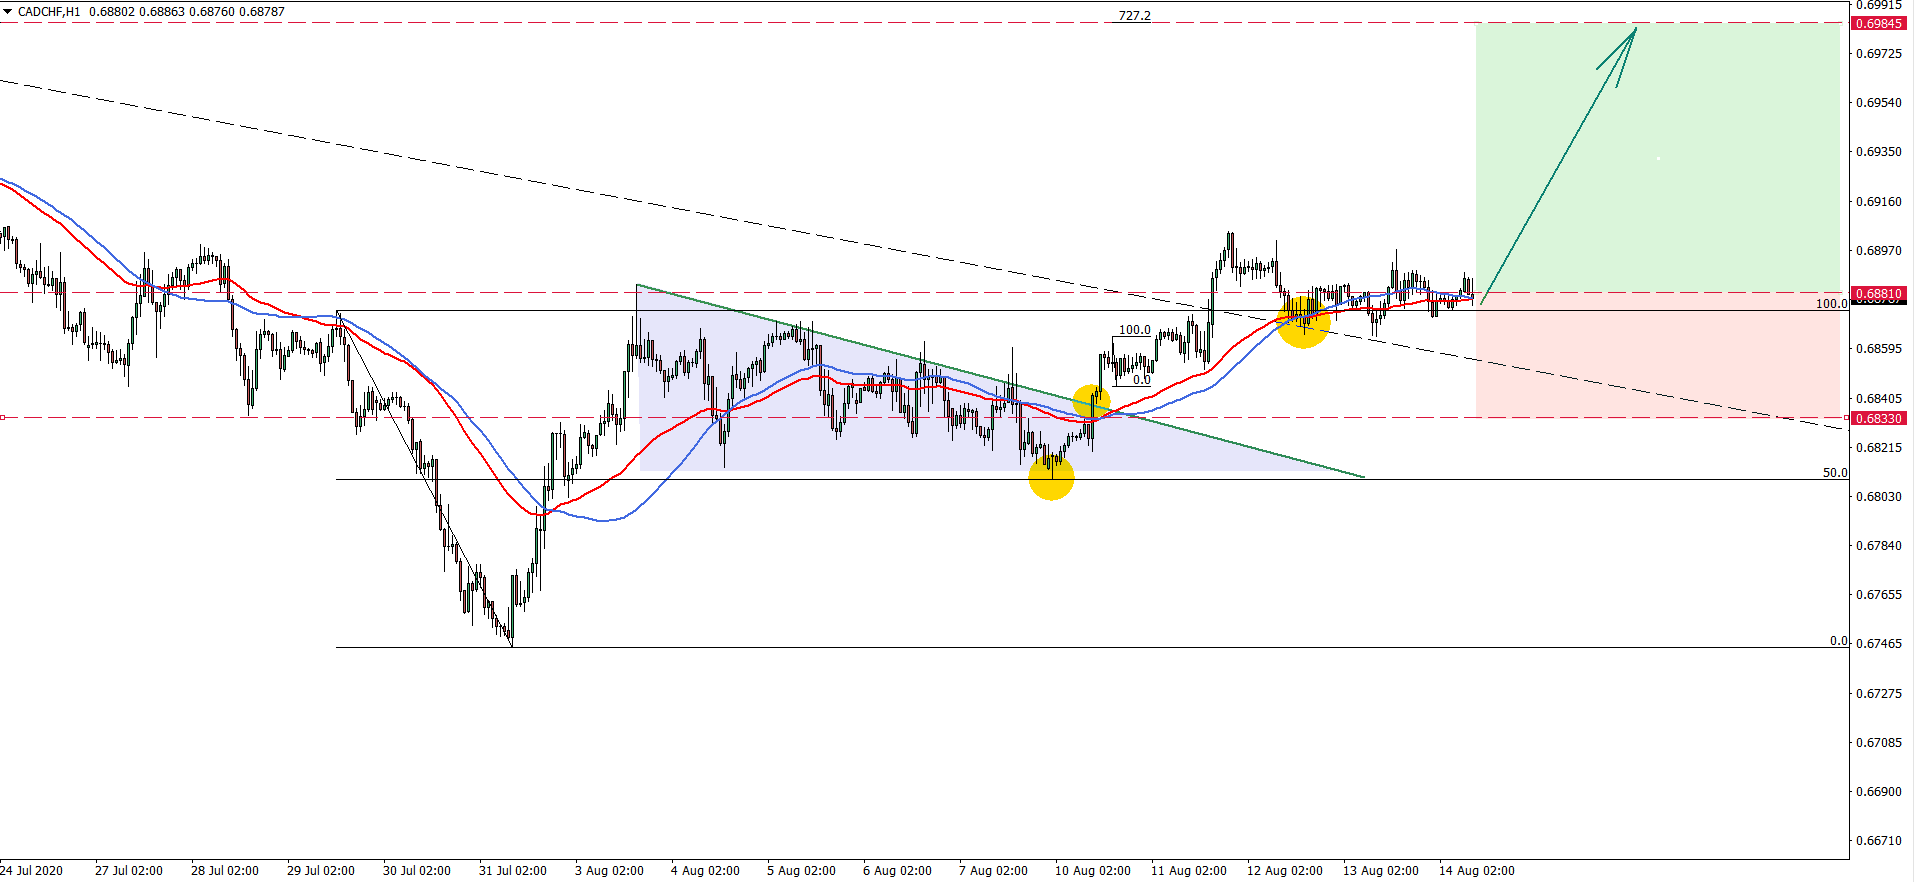 CADCHF hourly chart Aug 14th 2020